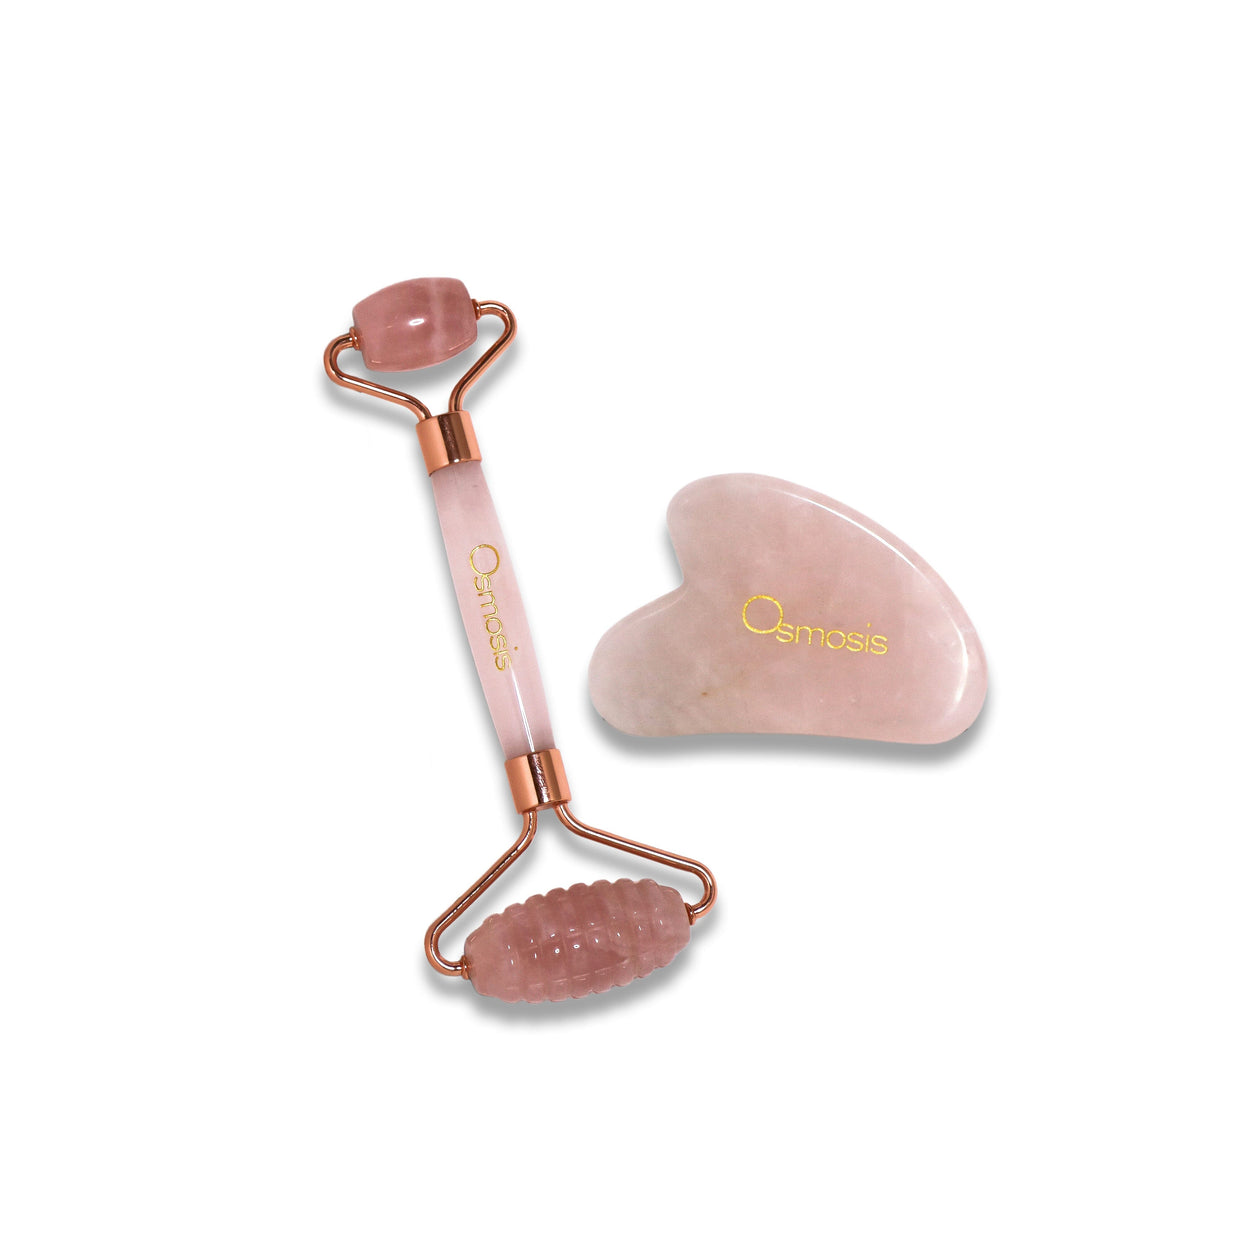 Osmosis Beauty Rose Quartz Roller Osmosis Beauty Shop at Exclusive Beauty Club